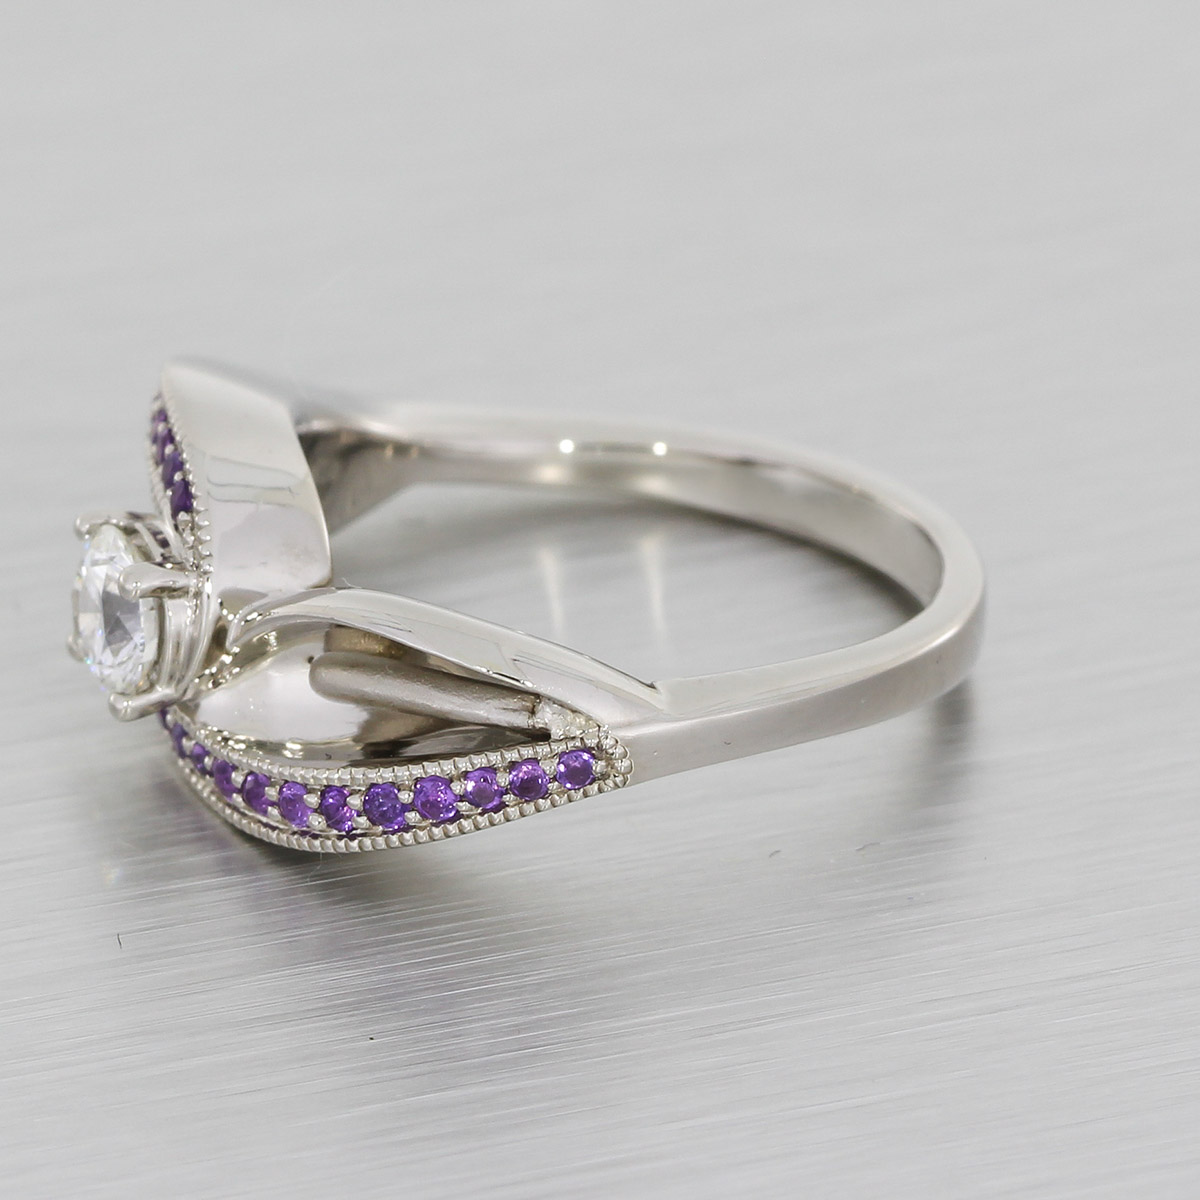 Limited time 12% off | South African Amethyst Sterling Silver Ring (Full  Clean Body VS Level) - Shop Nature¹¹ General Rings - Pinkoi